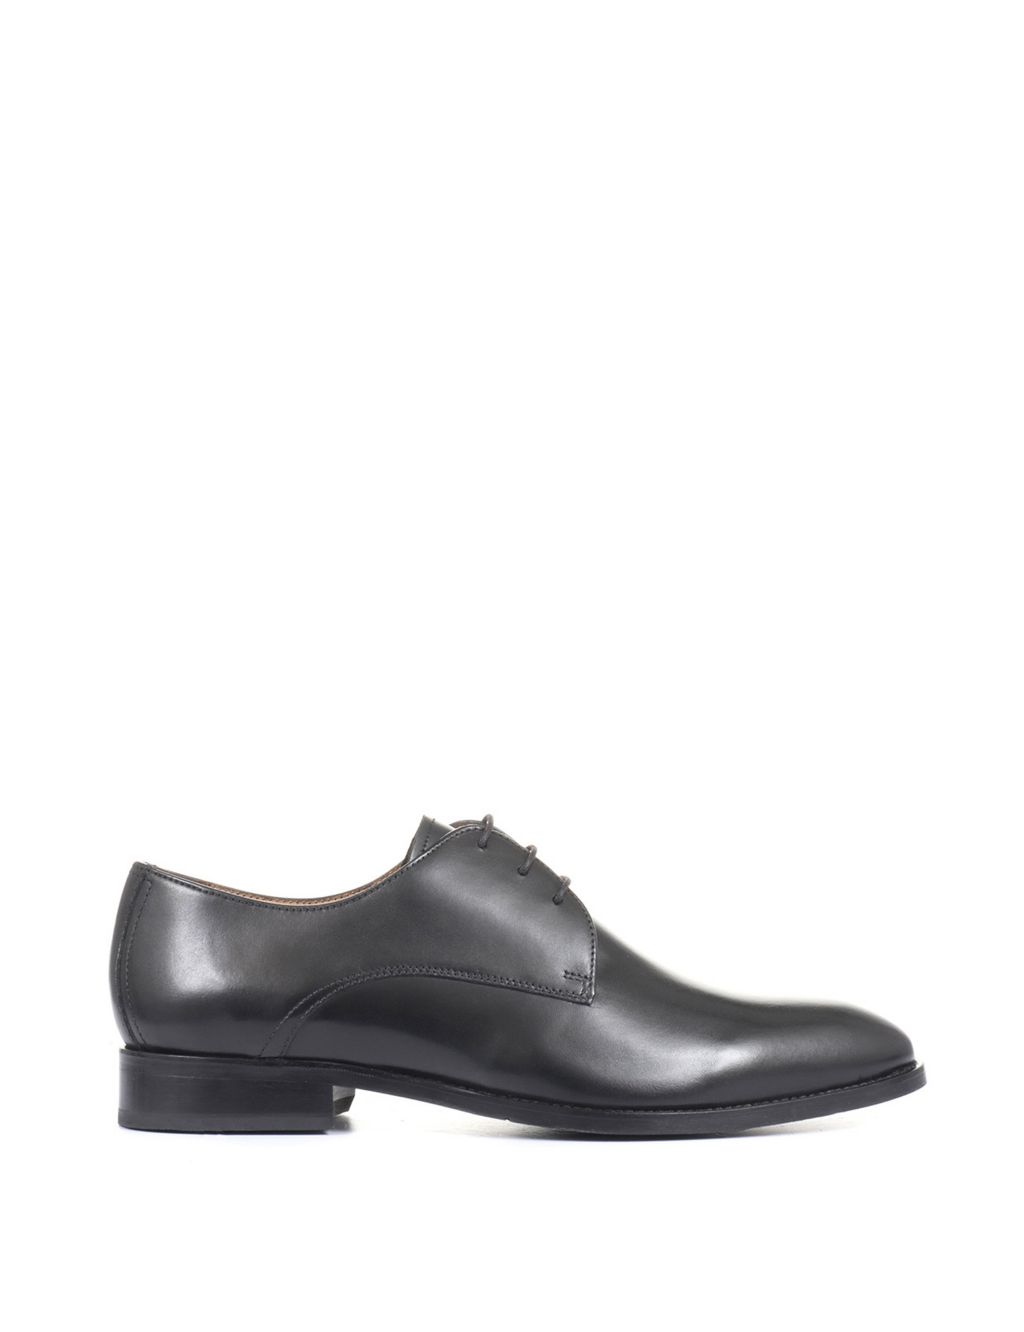 Leather Derby Shoe image 2